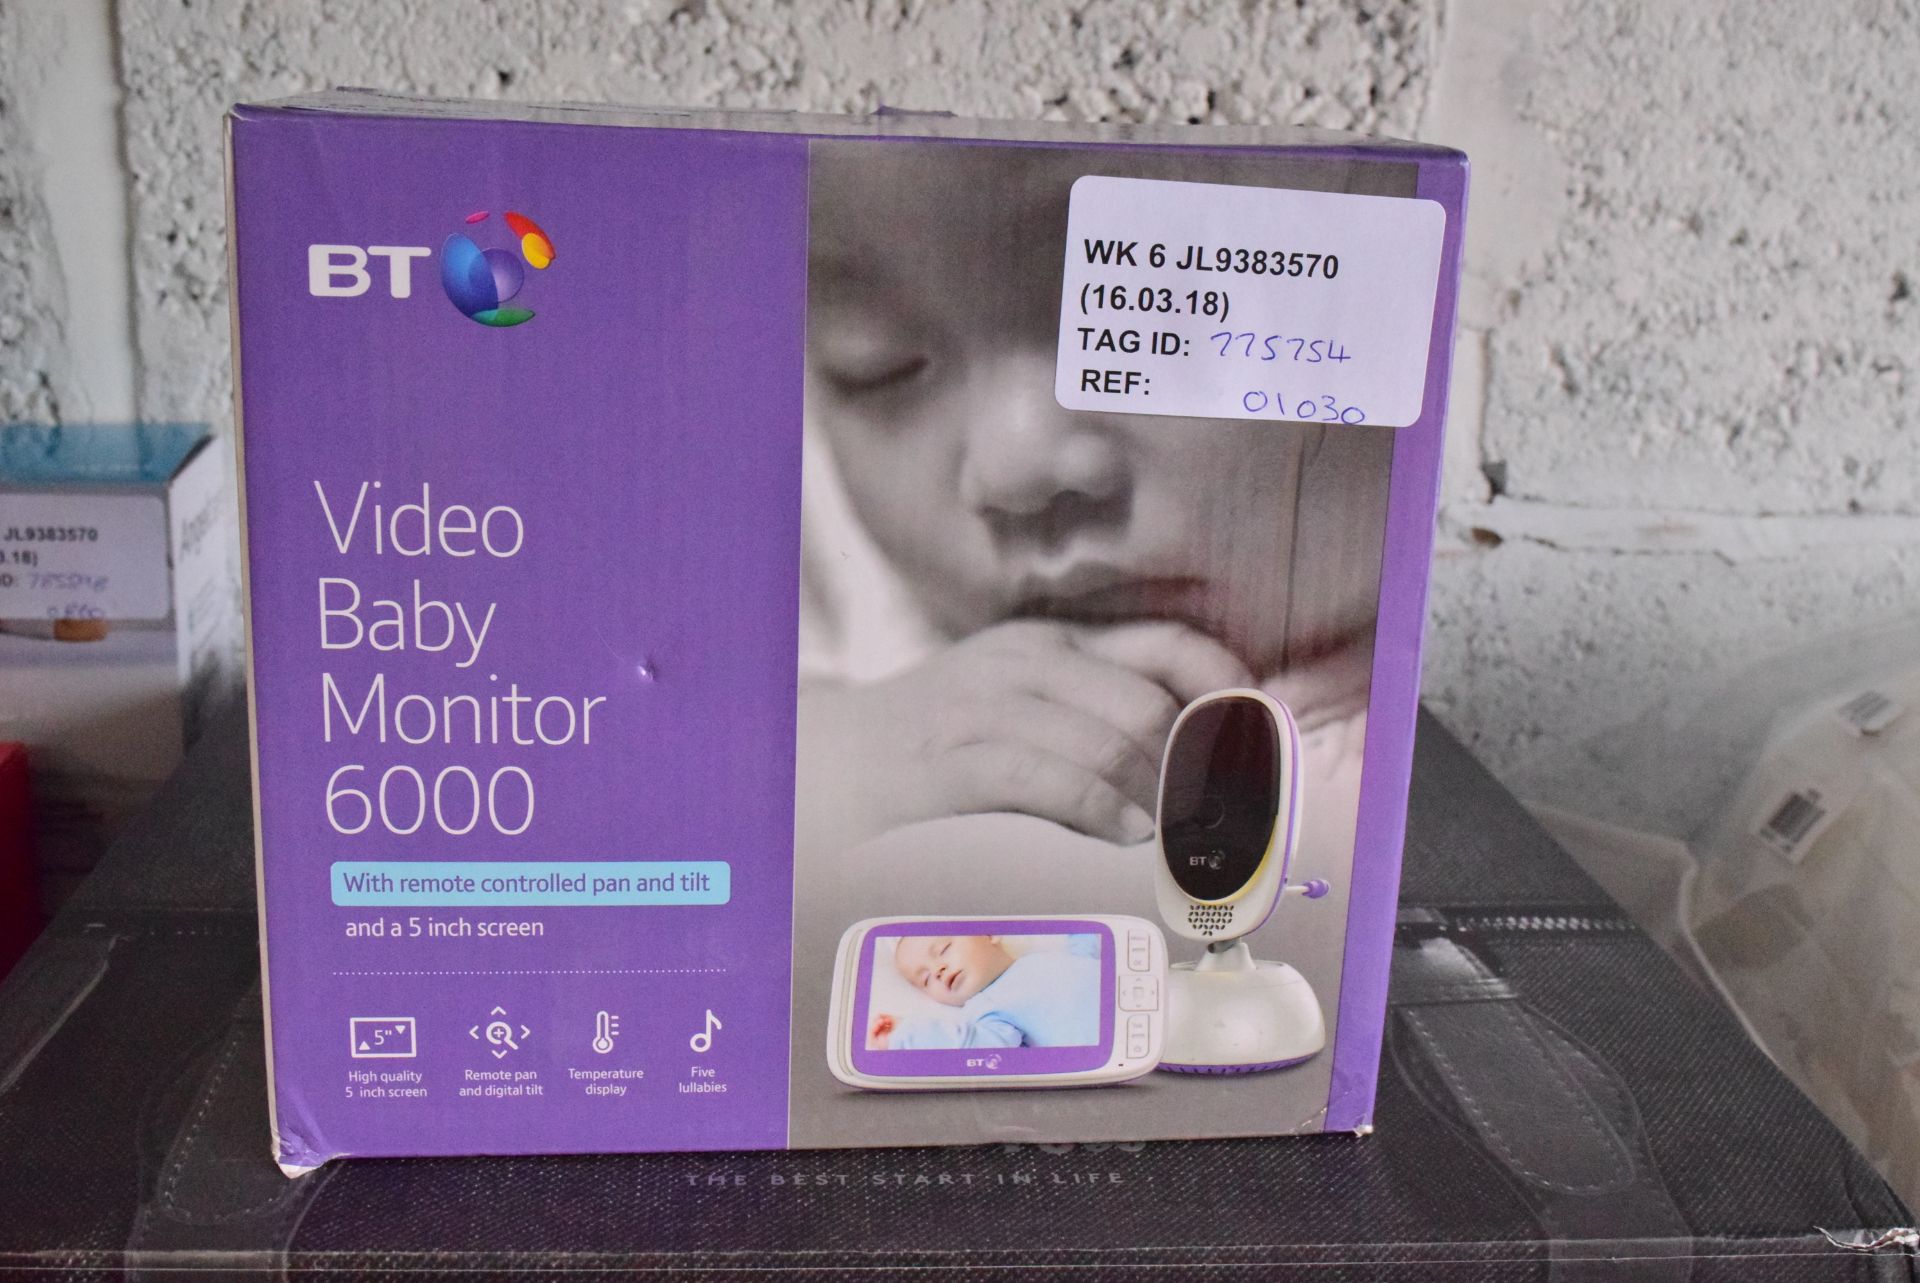 1 x BT 6000 VIDEO BABY MONITOR RRP £110 16.03.18 775754 *PLEASE NOTE THAT THE BID PRICE IS